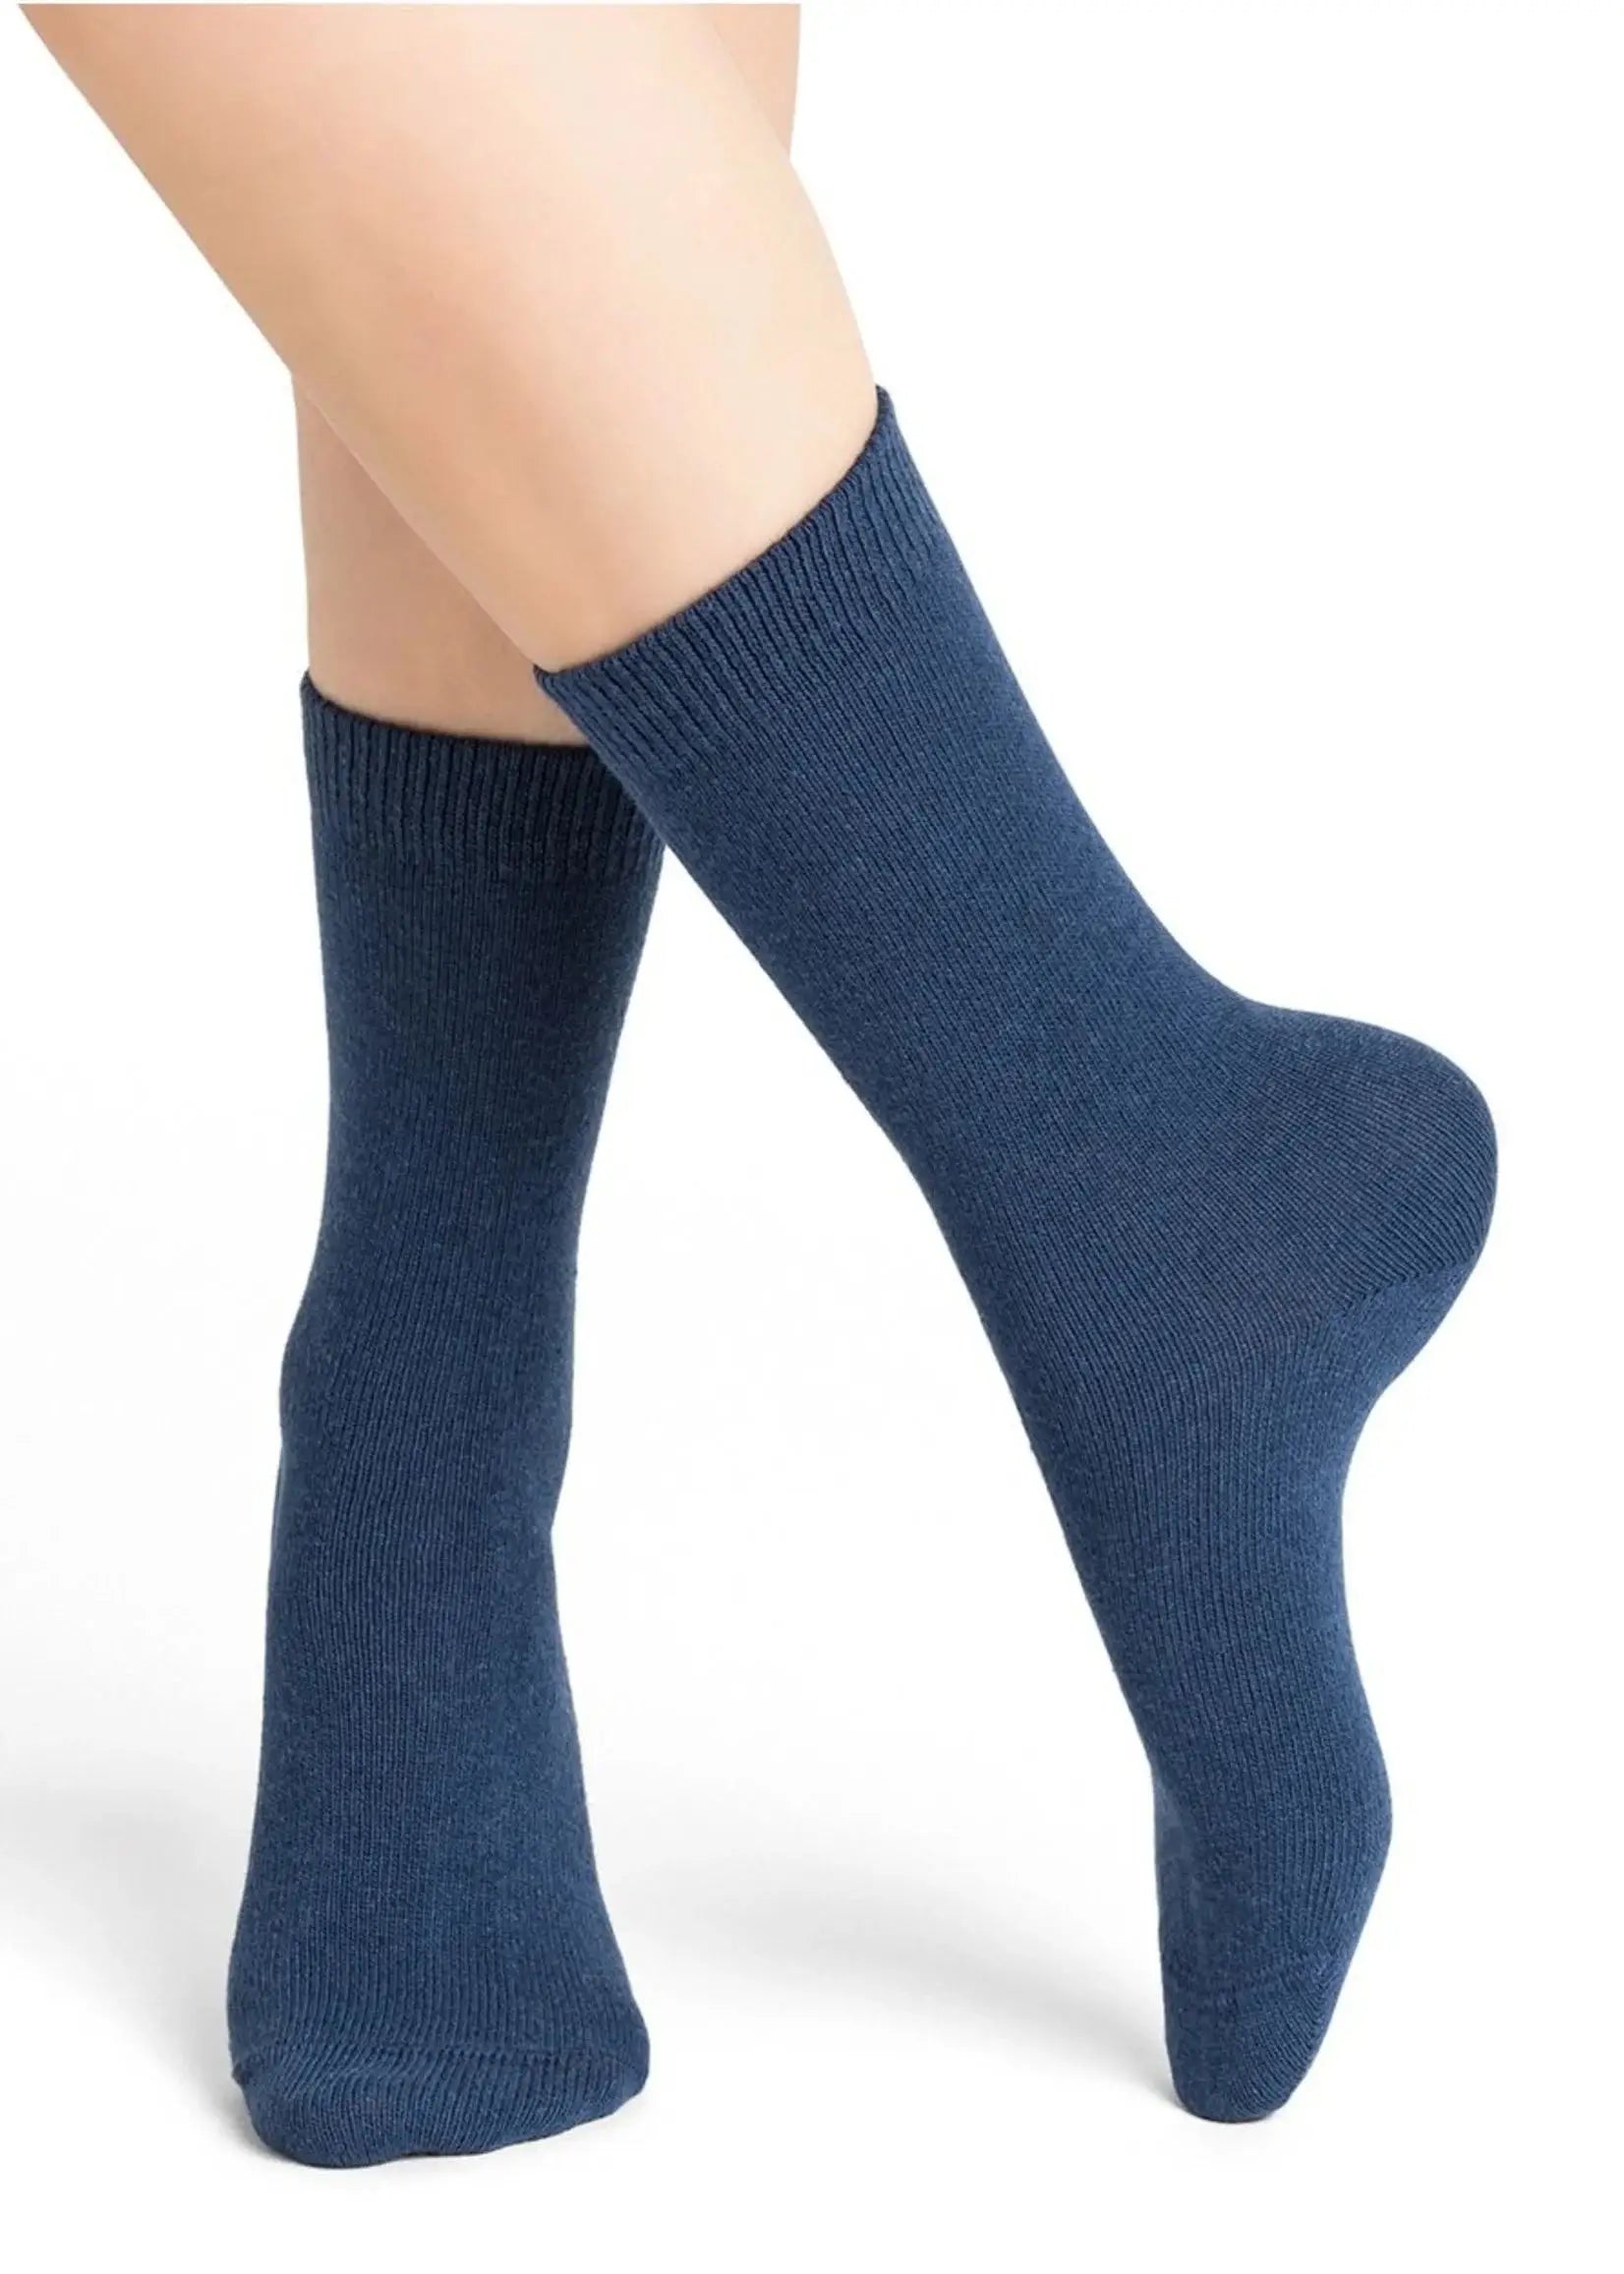 The legs of a woman wearing a pair of Bleuforet 6095 Cashmere Blend Socks.